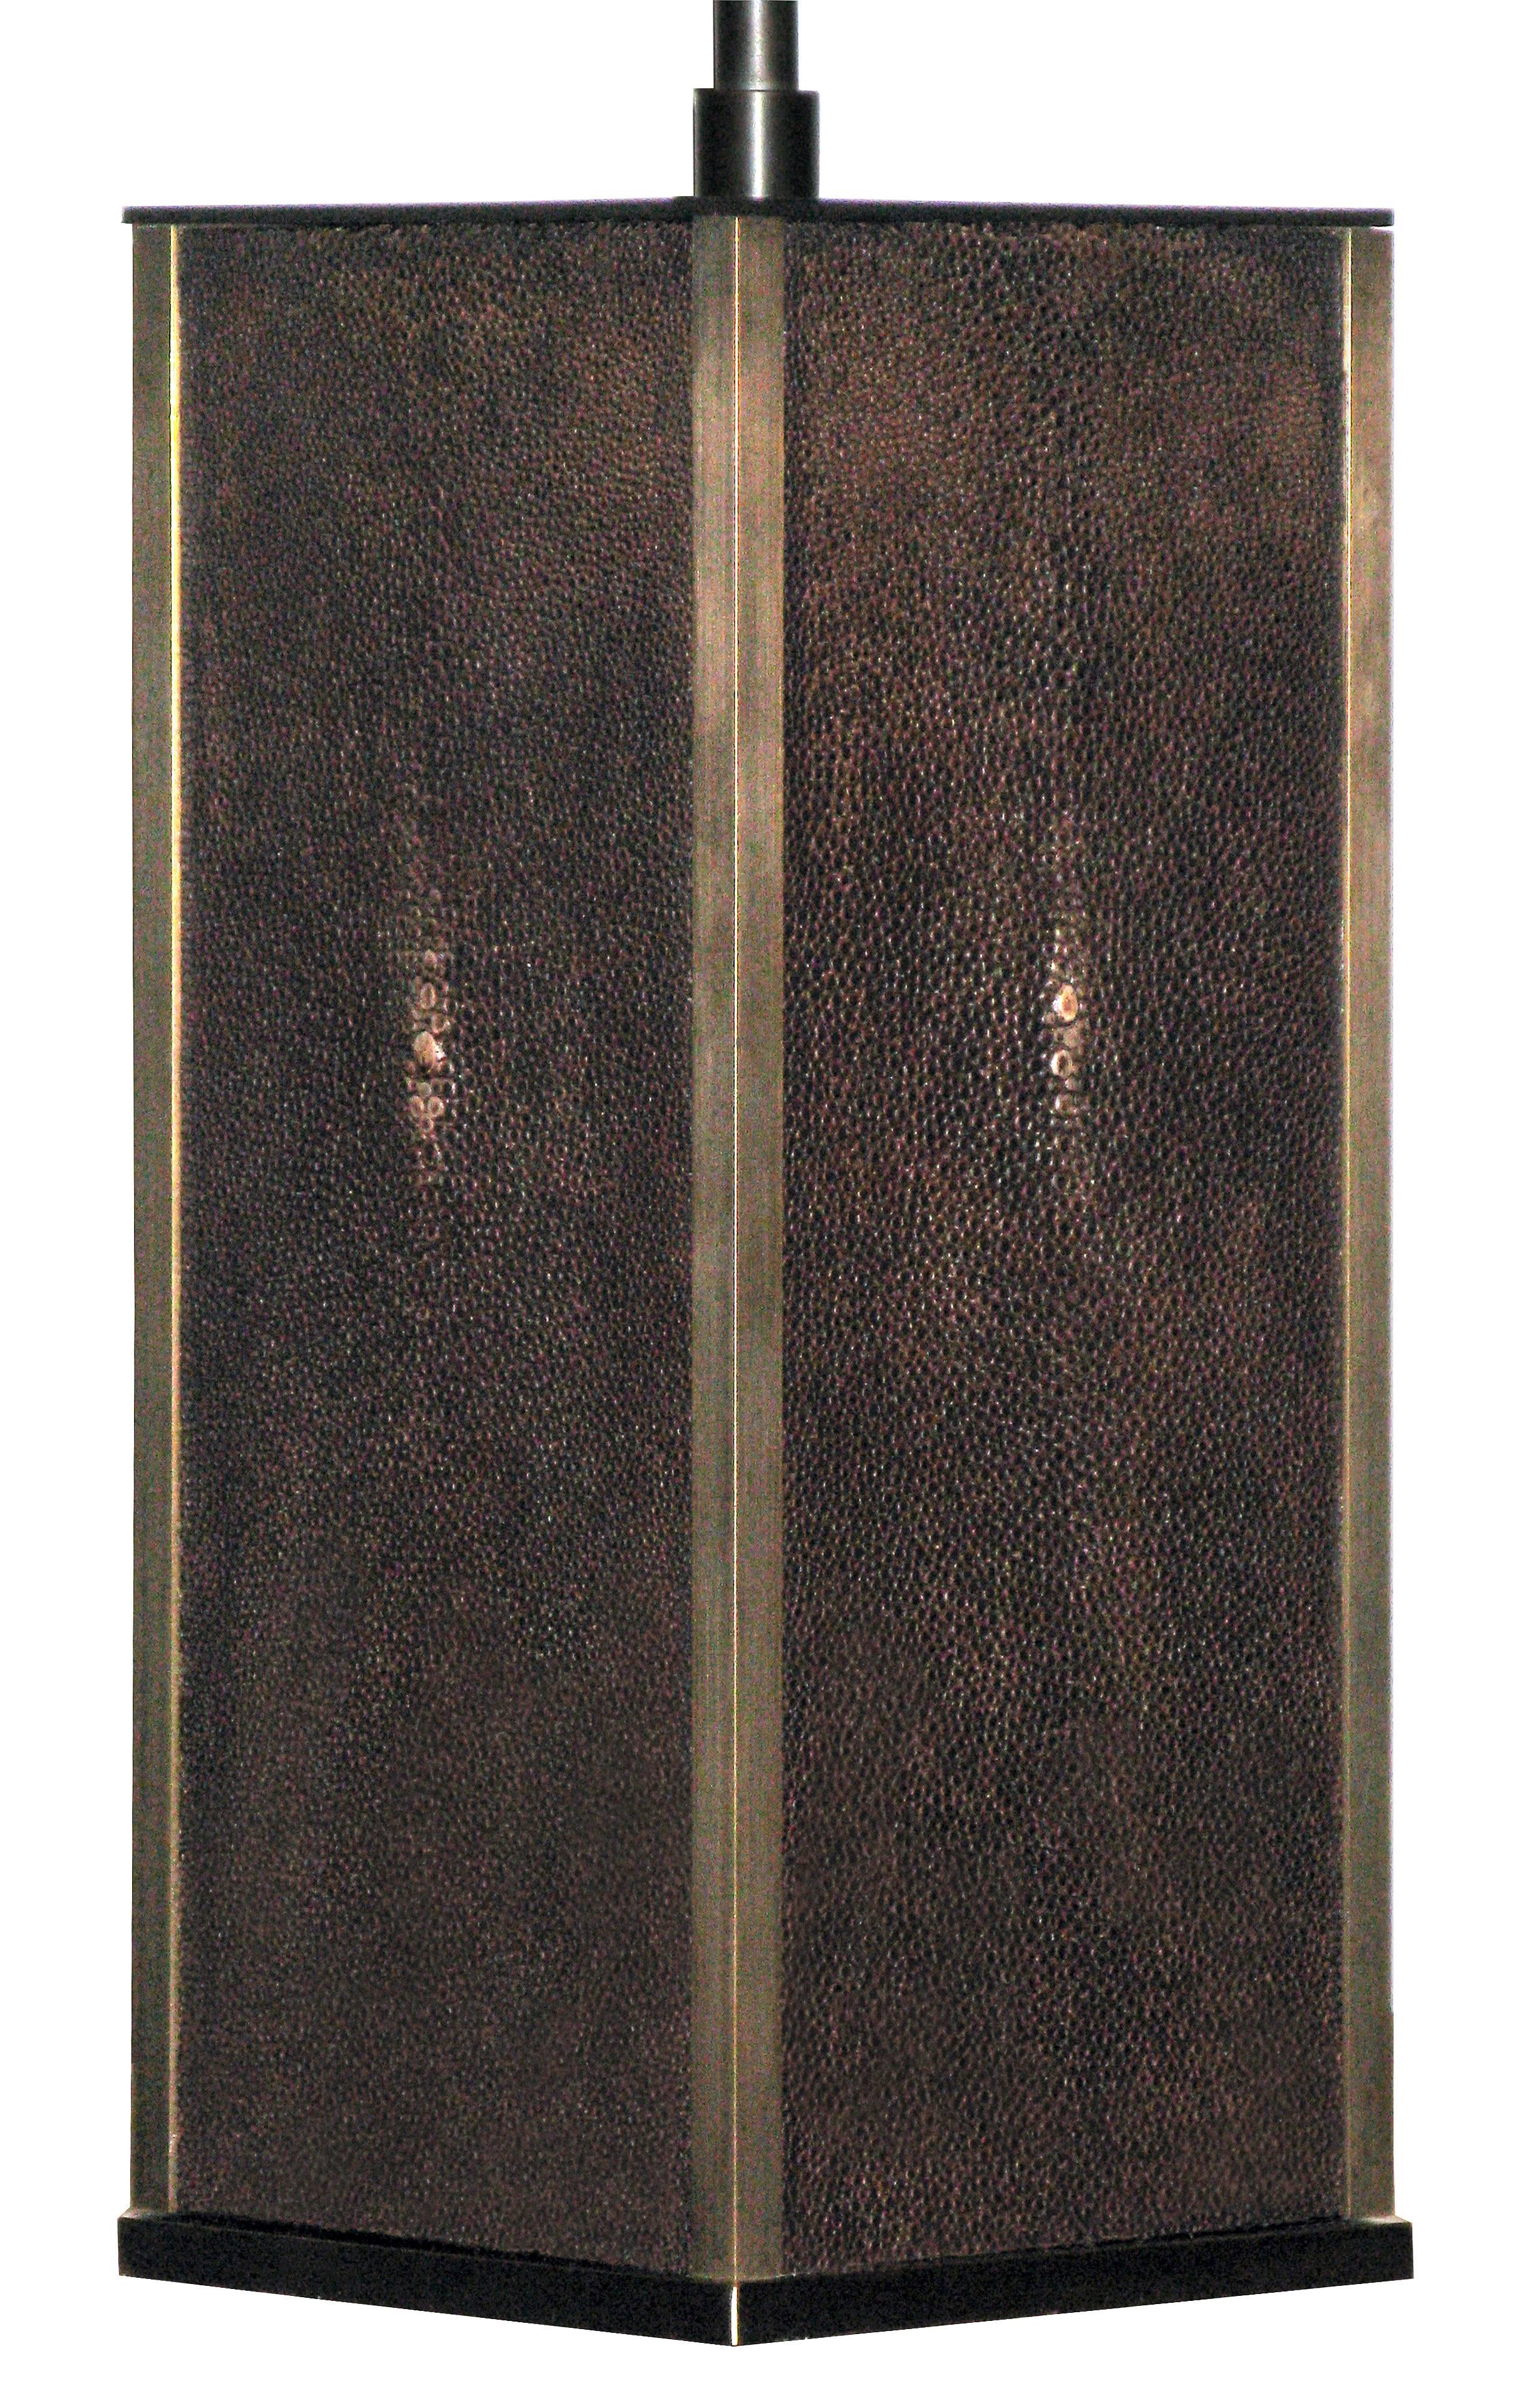 Pair of exceptional table lamps in bronze with chocolate brown shagreen 
panels on all sides by Karl Springer, American, 1970s.